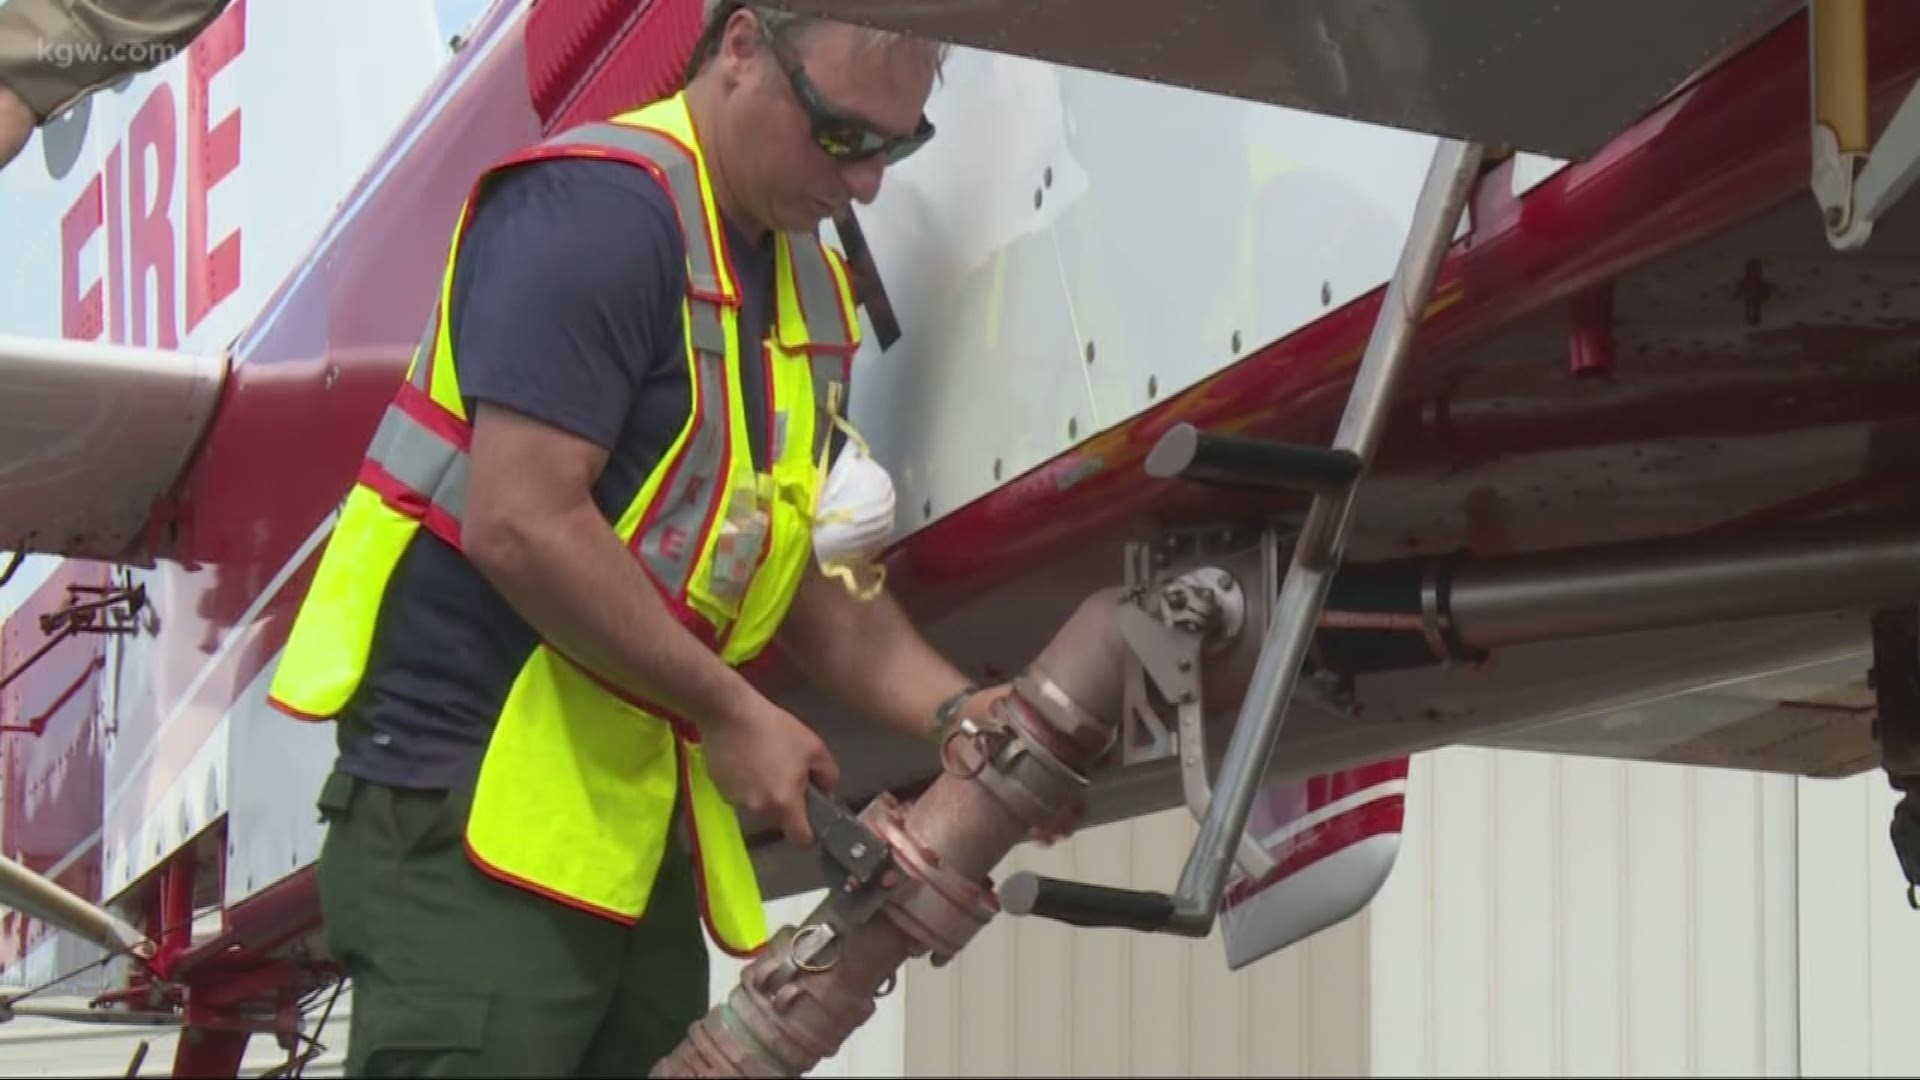 Training to use air tankers to fight wildfires.